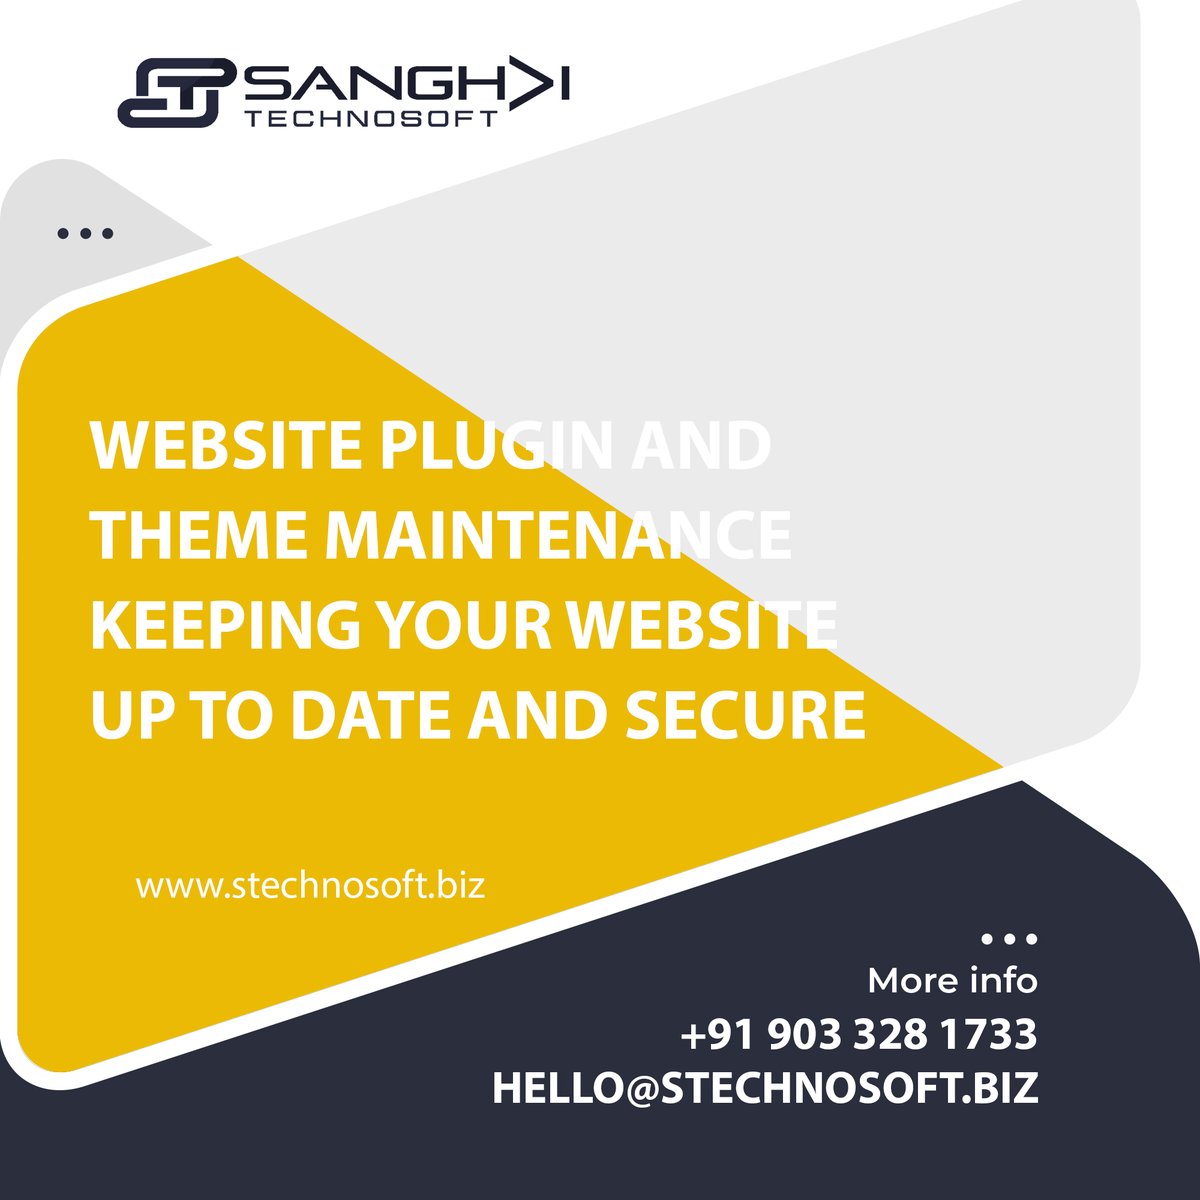 Website plugin and theme maintenance: keeping your website up to date and secure

#WebsiteMaintenance #PluginUpdates #ThemeUpdates #WebsiteSecurity #WebsiteOptimization #WebsitePerformance #SeamlessUserExperience #WebsiteManagement #SecurityPatching #CompatibilityTesting